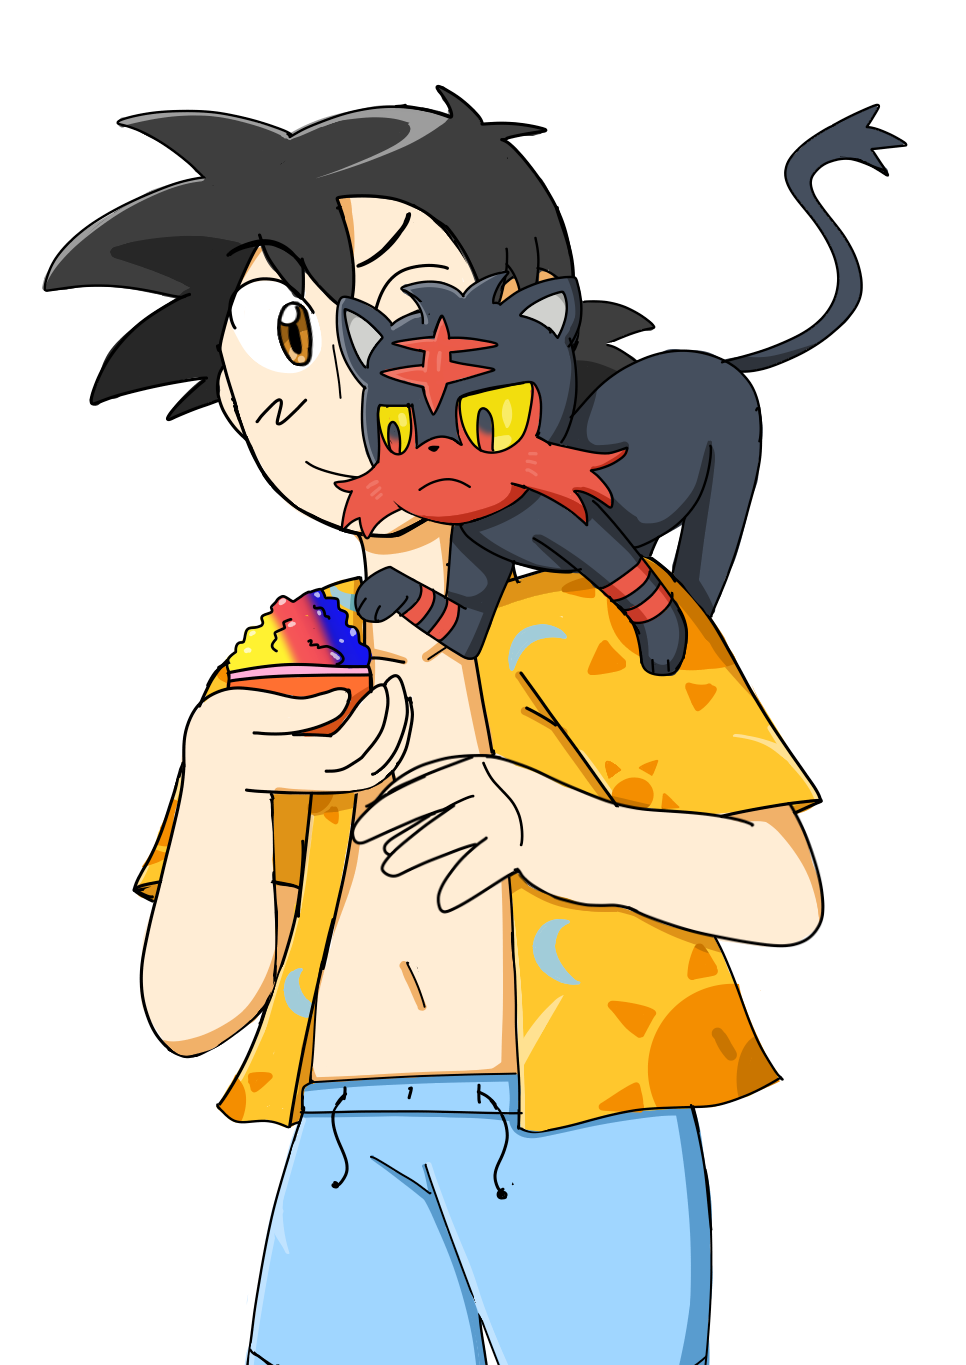 noodlerama: Ash figured out that the only way he can warm up to his fiesty cat is